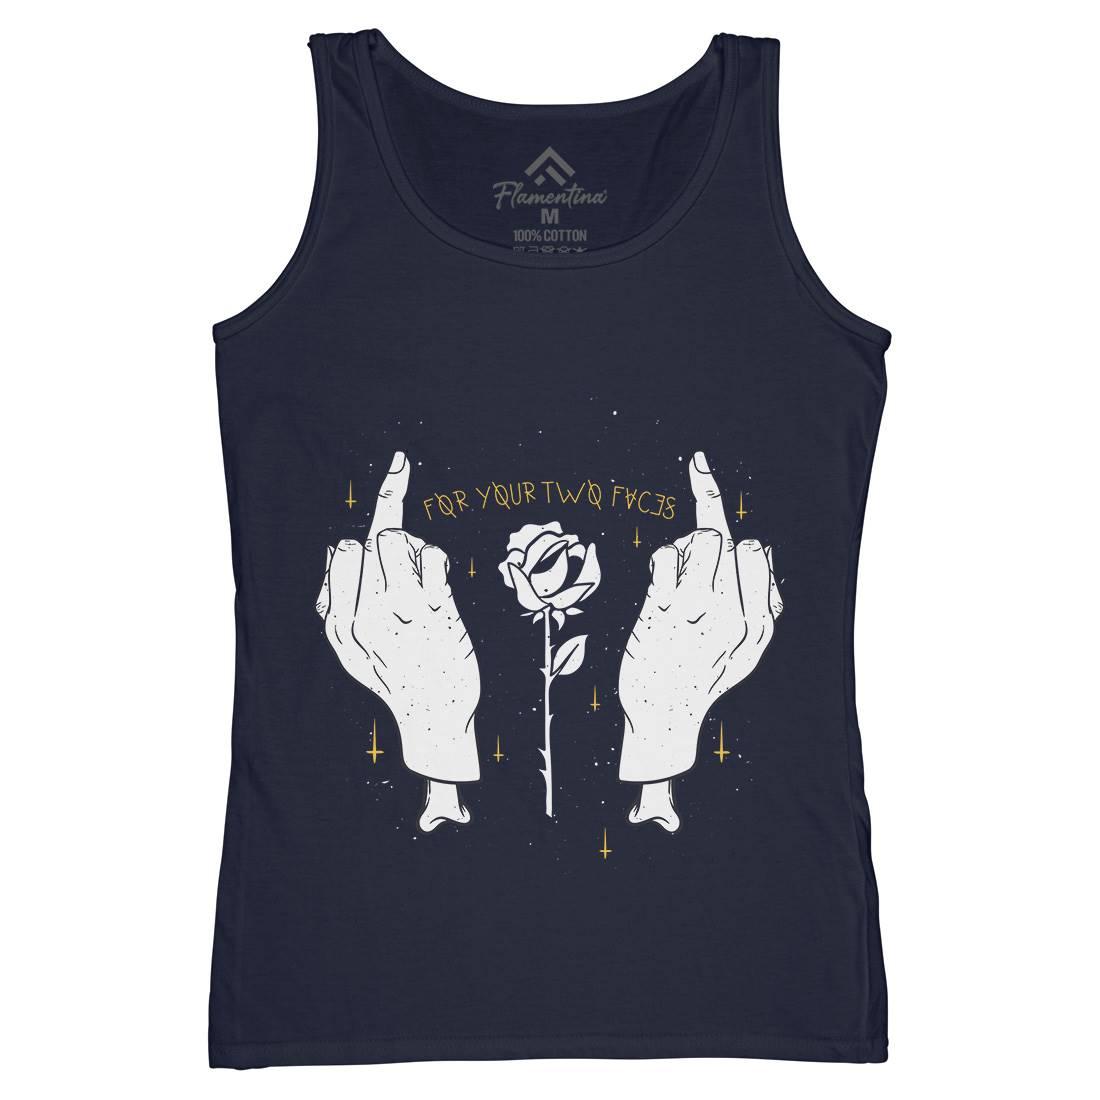 For Your Two Faces Womens Organic Tank Top Vest Quotes D456